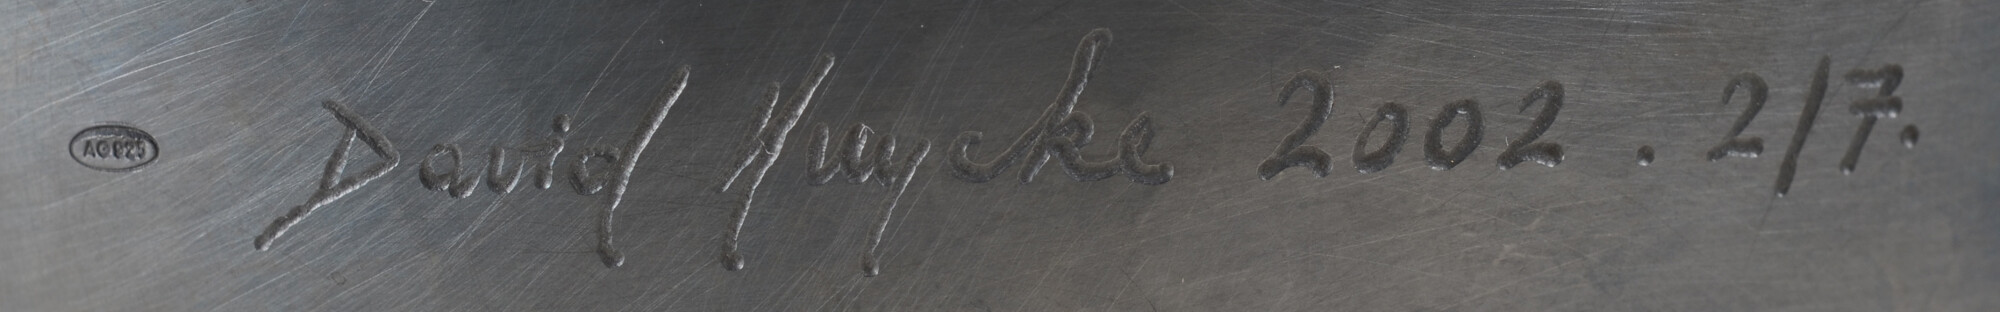 David Huycke — Signature of the artist on all the pieces, together with date of fabrication, justification and alloy mark